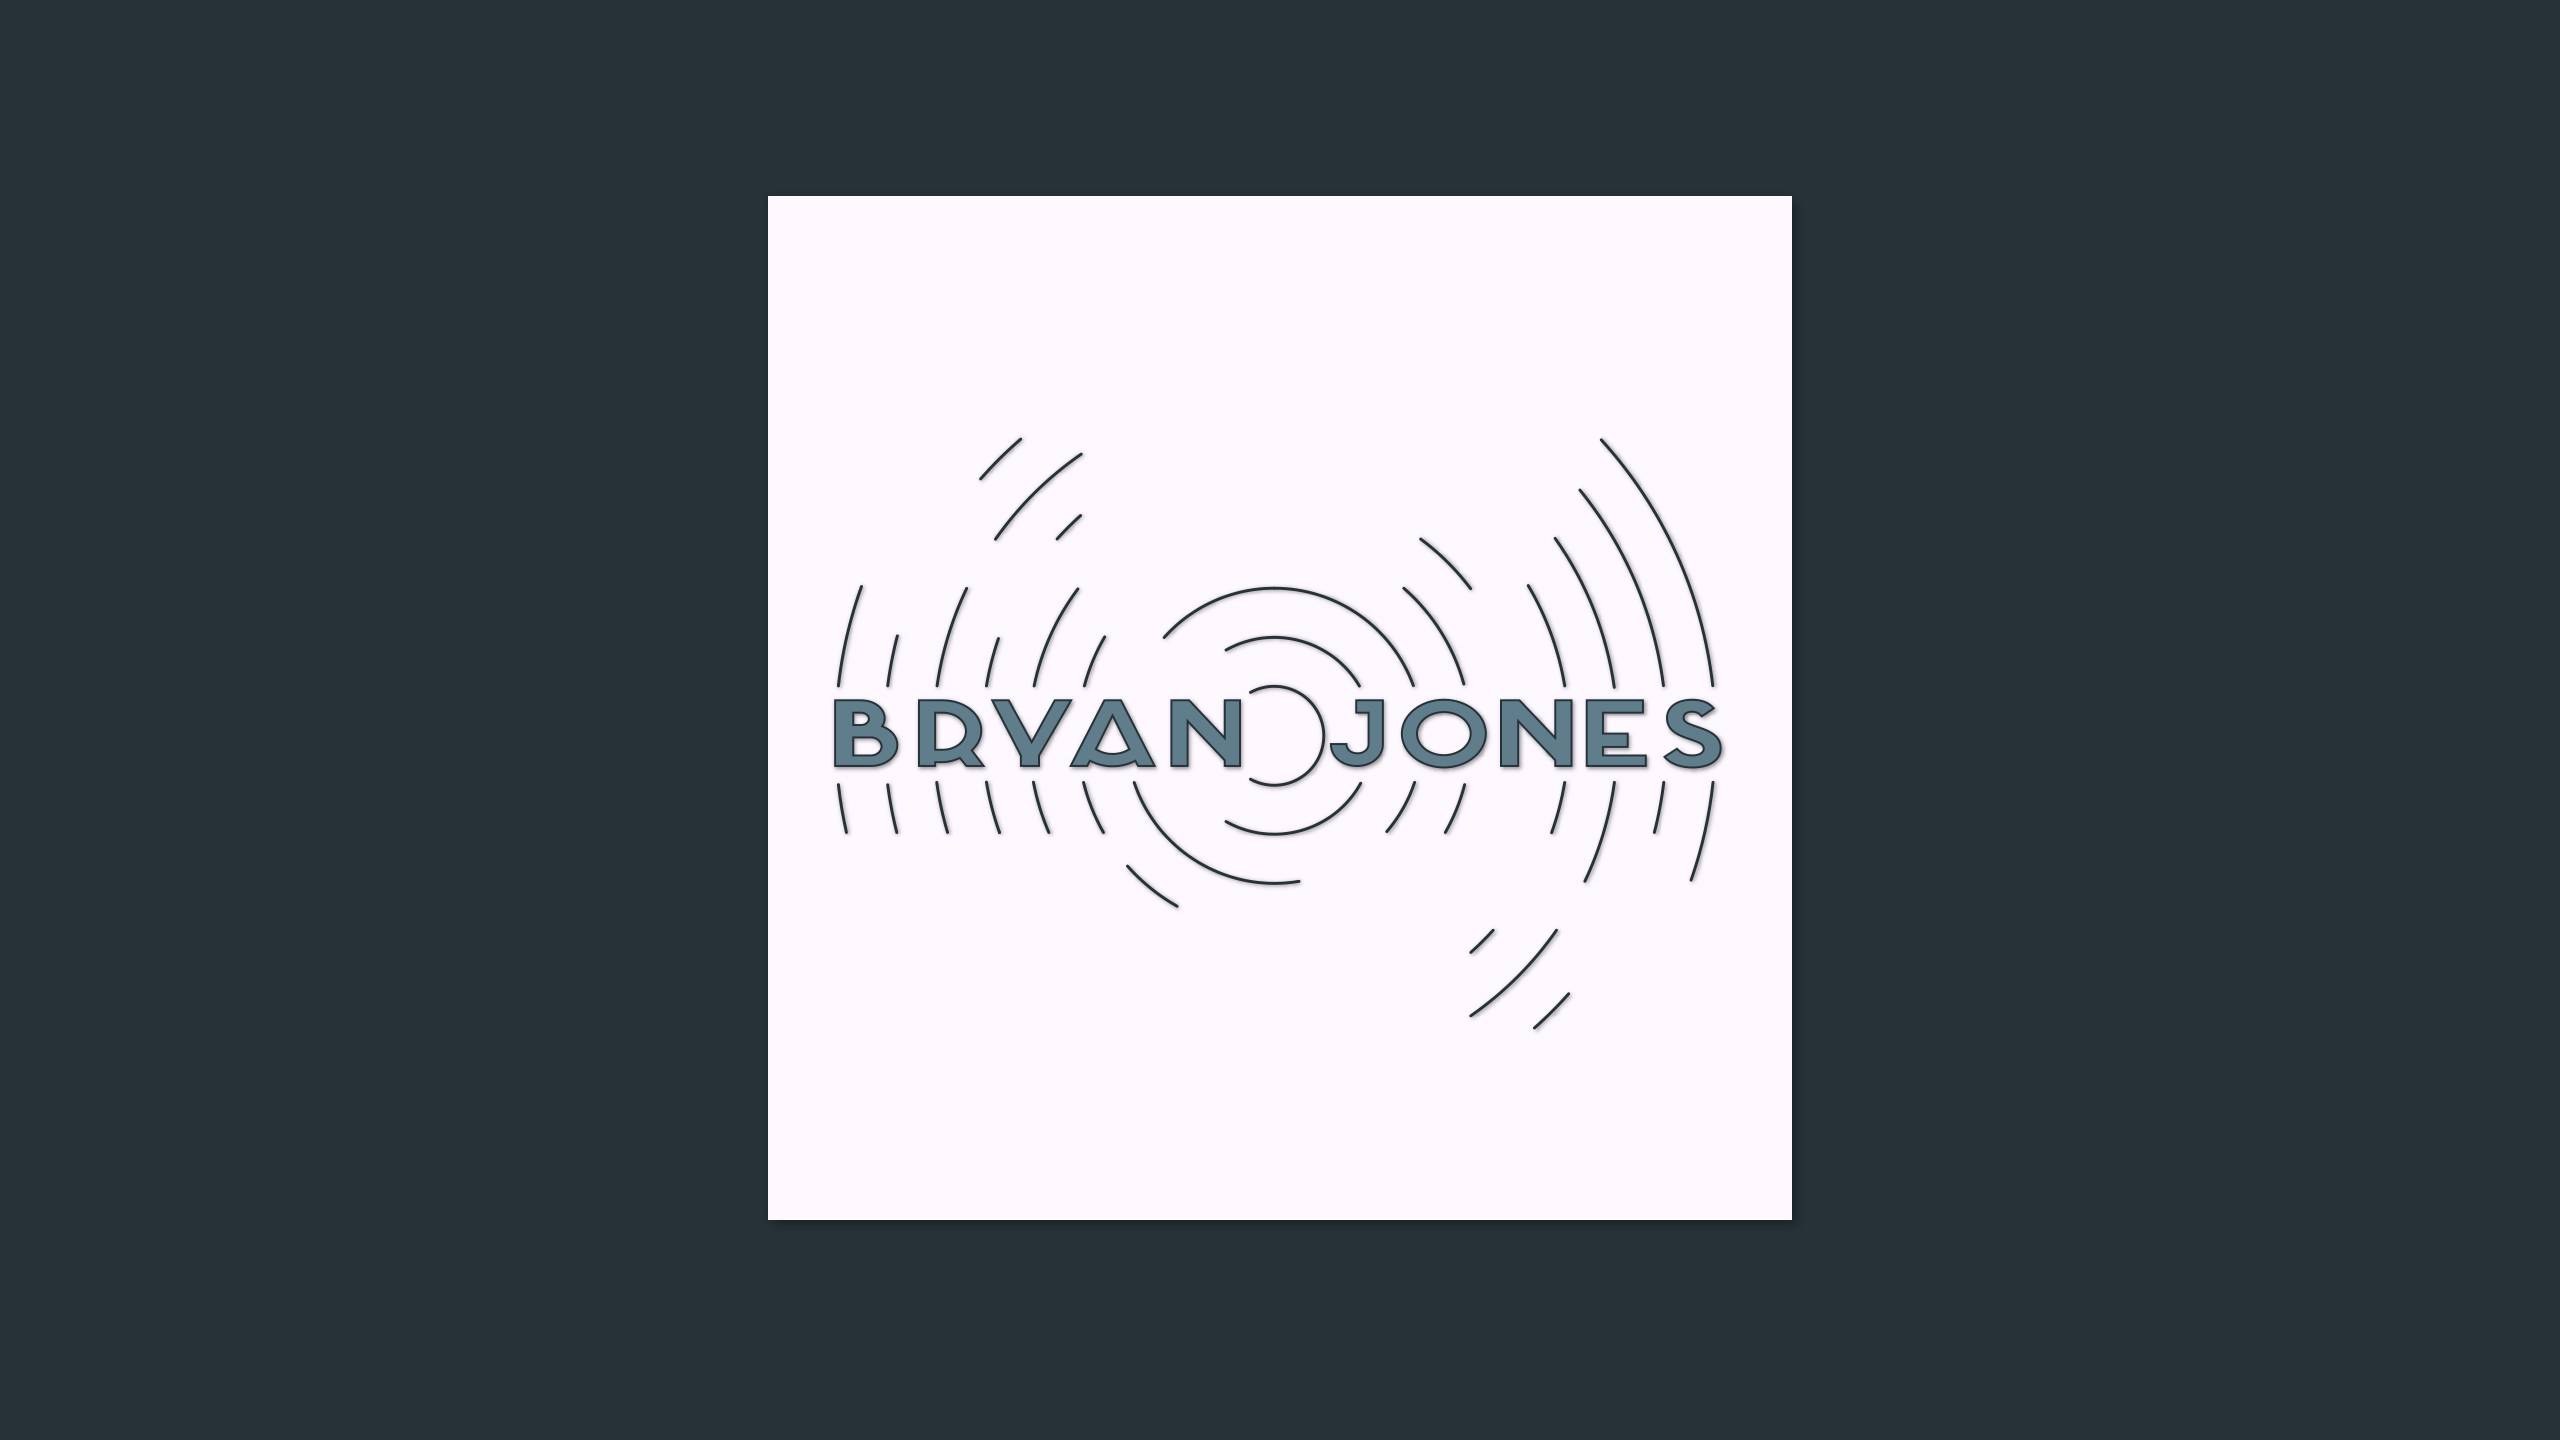 Branding design created for Bryan Jones by Dephined